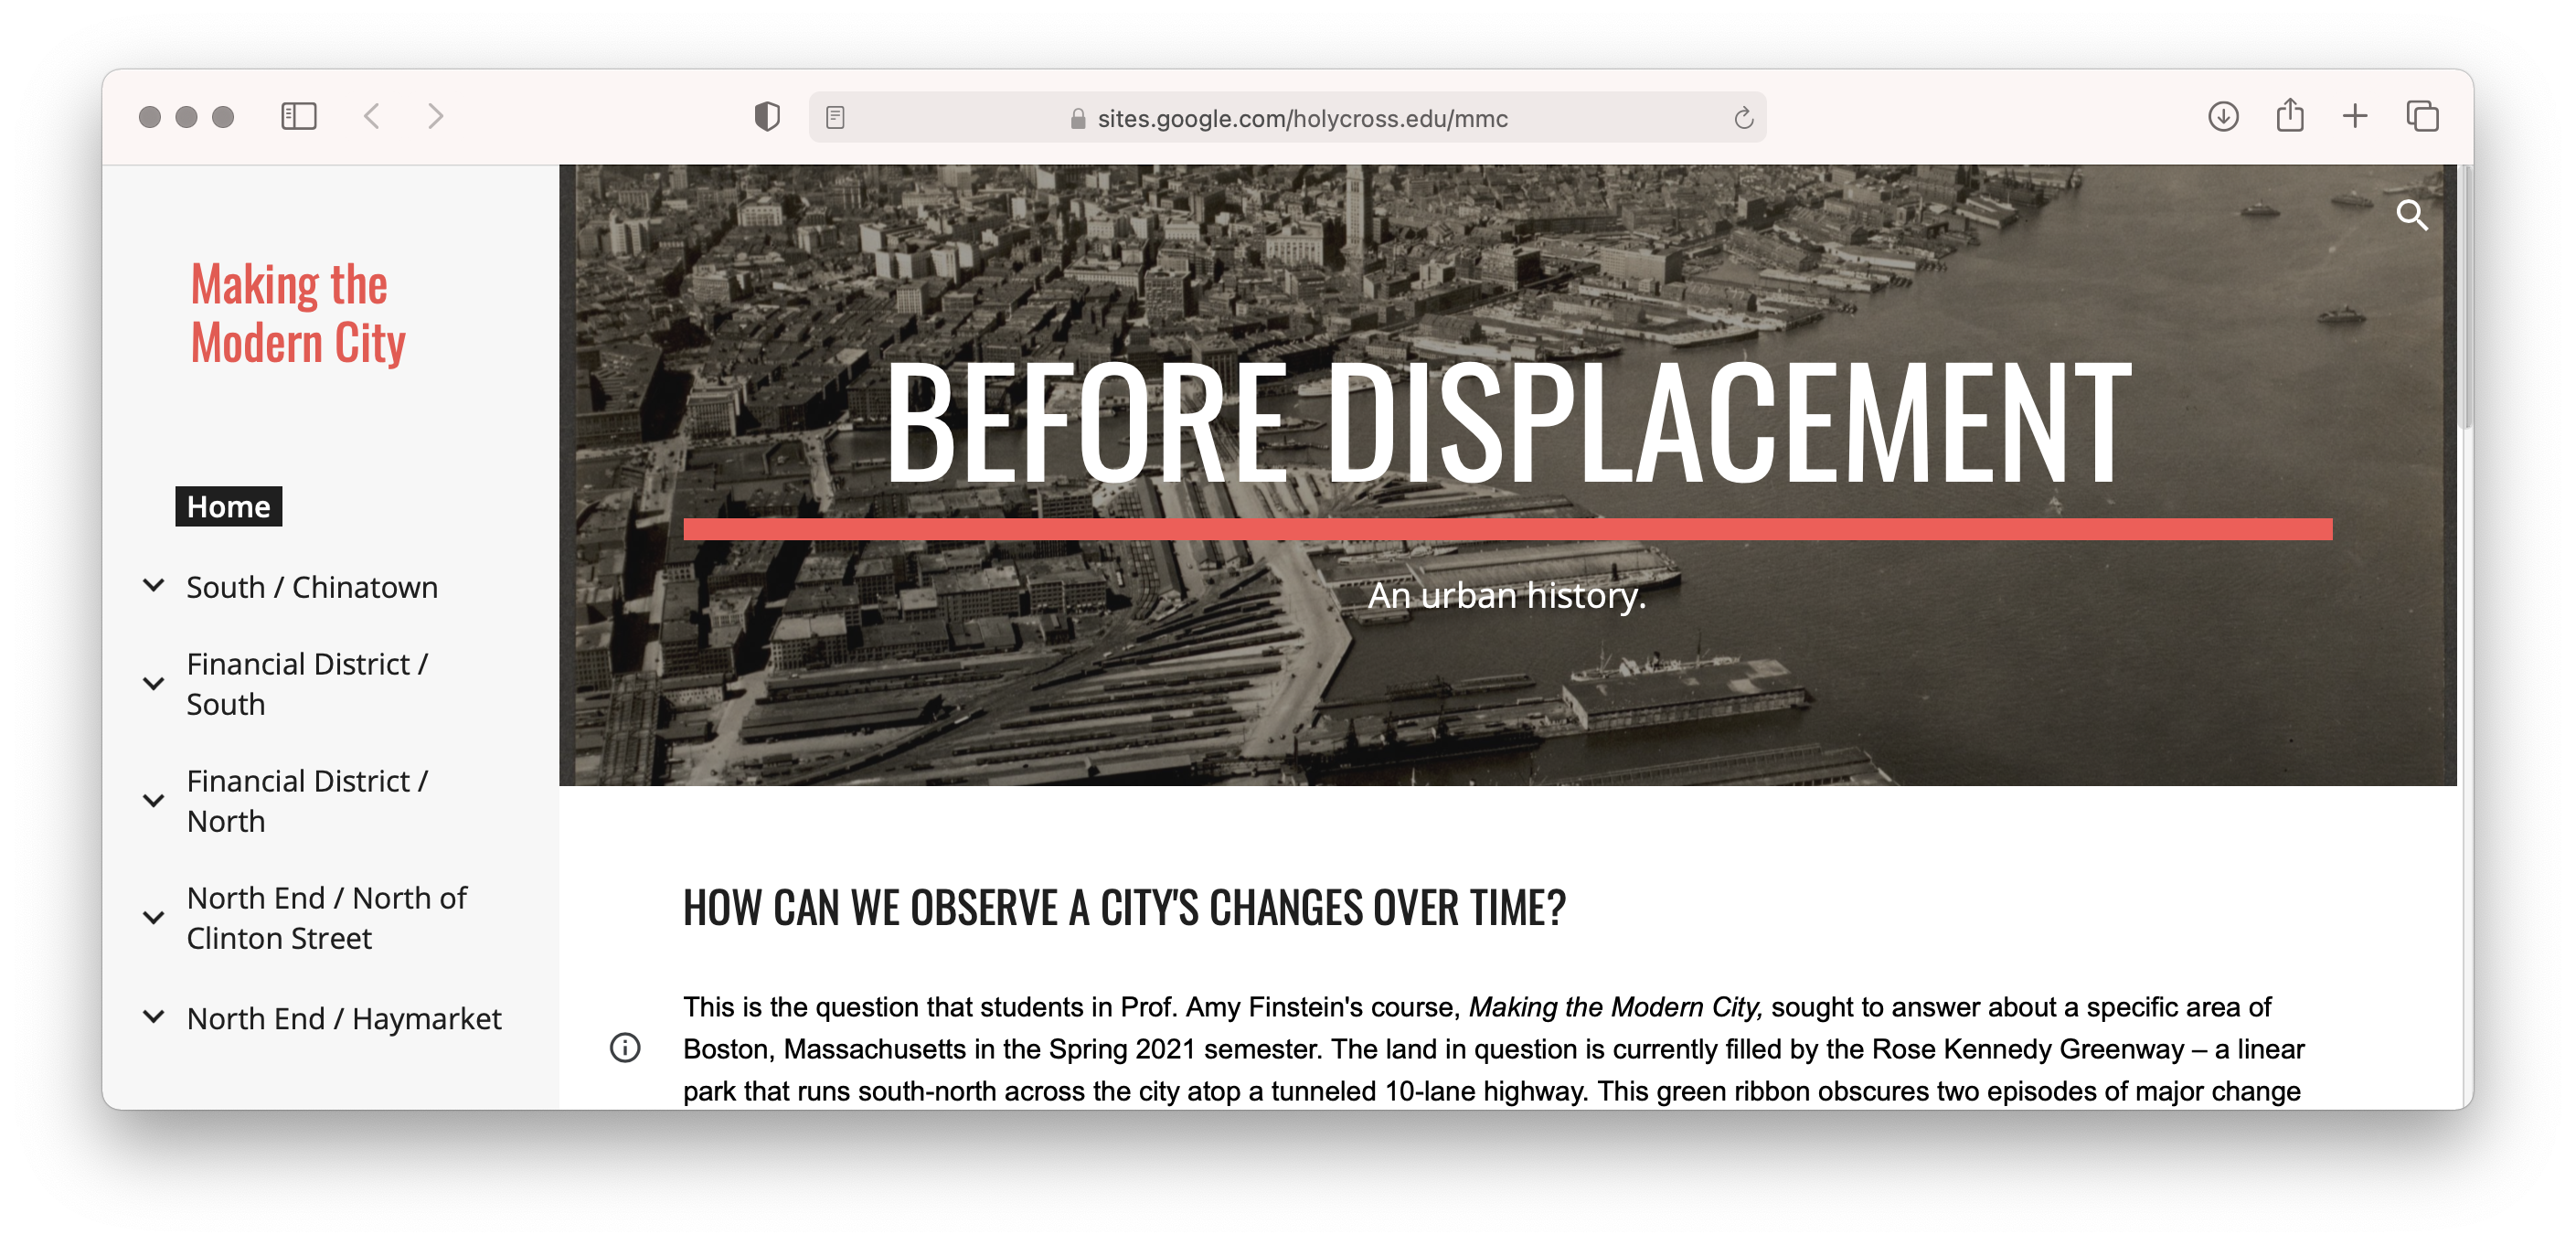 Screenshot of the Before Displacement website showing introductory text and navigation